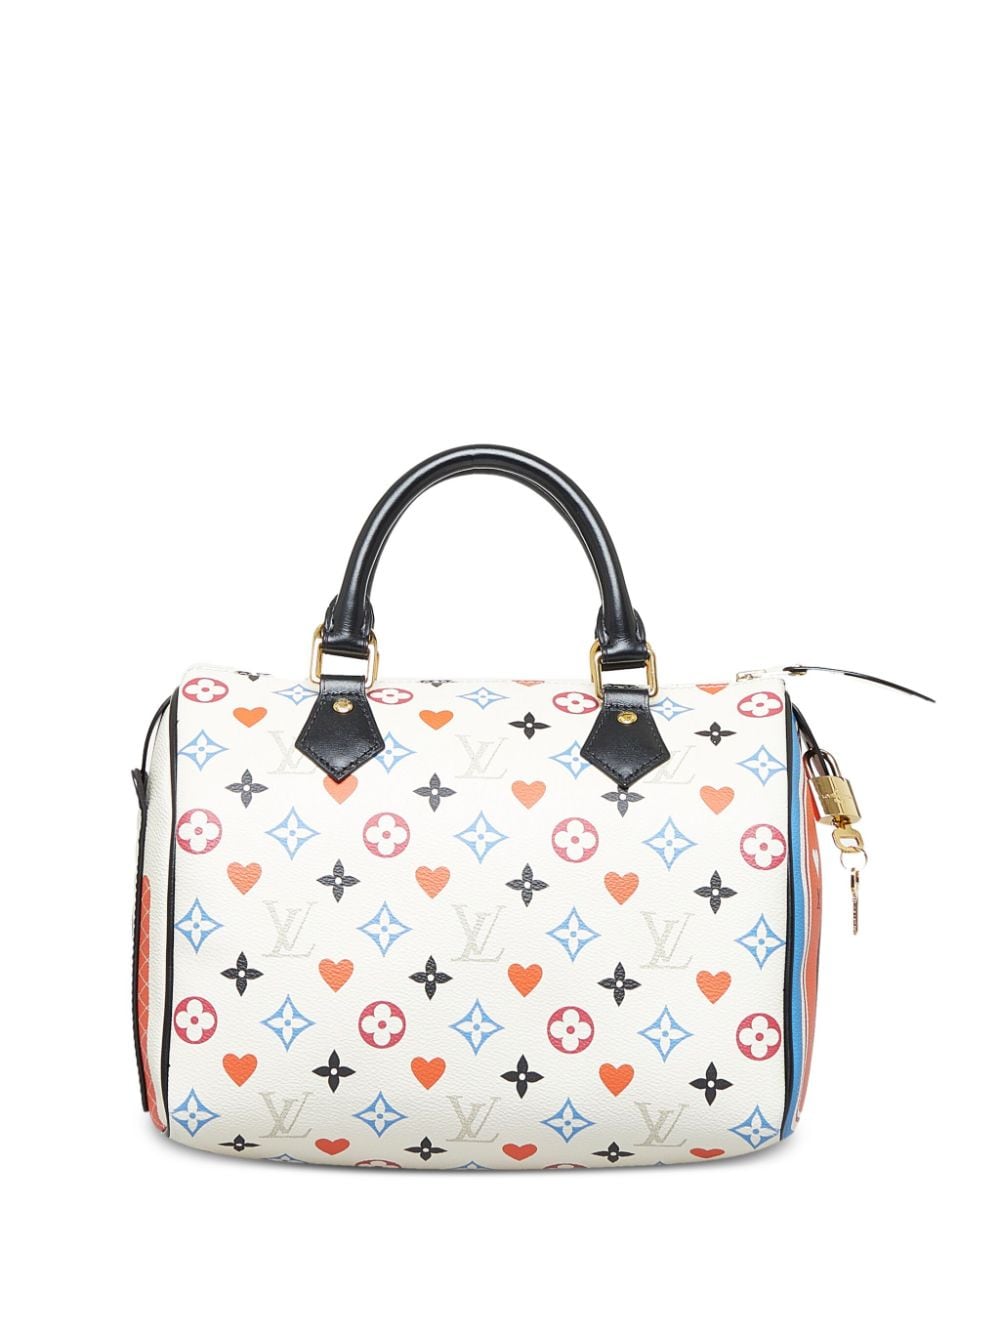 Louis Vuitton Pre-Owned 2020 pre-owned Speedy Bandoulière 25 two-way bag - White